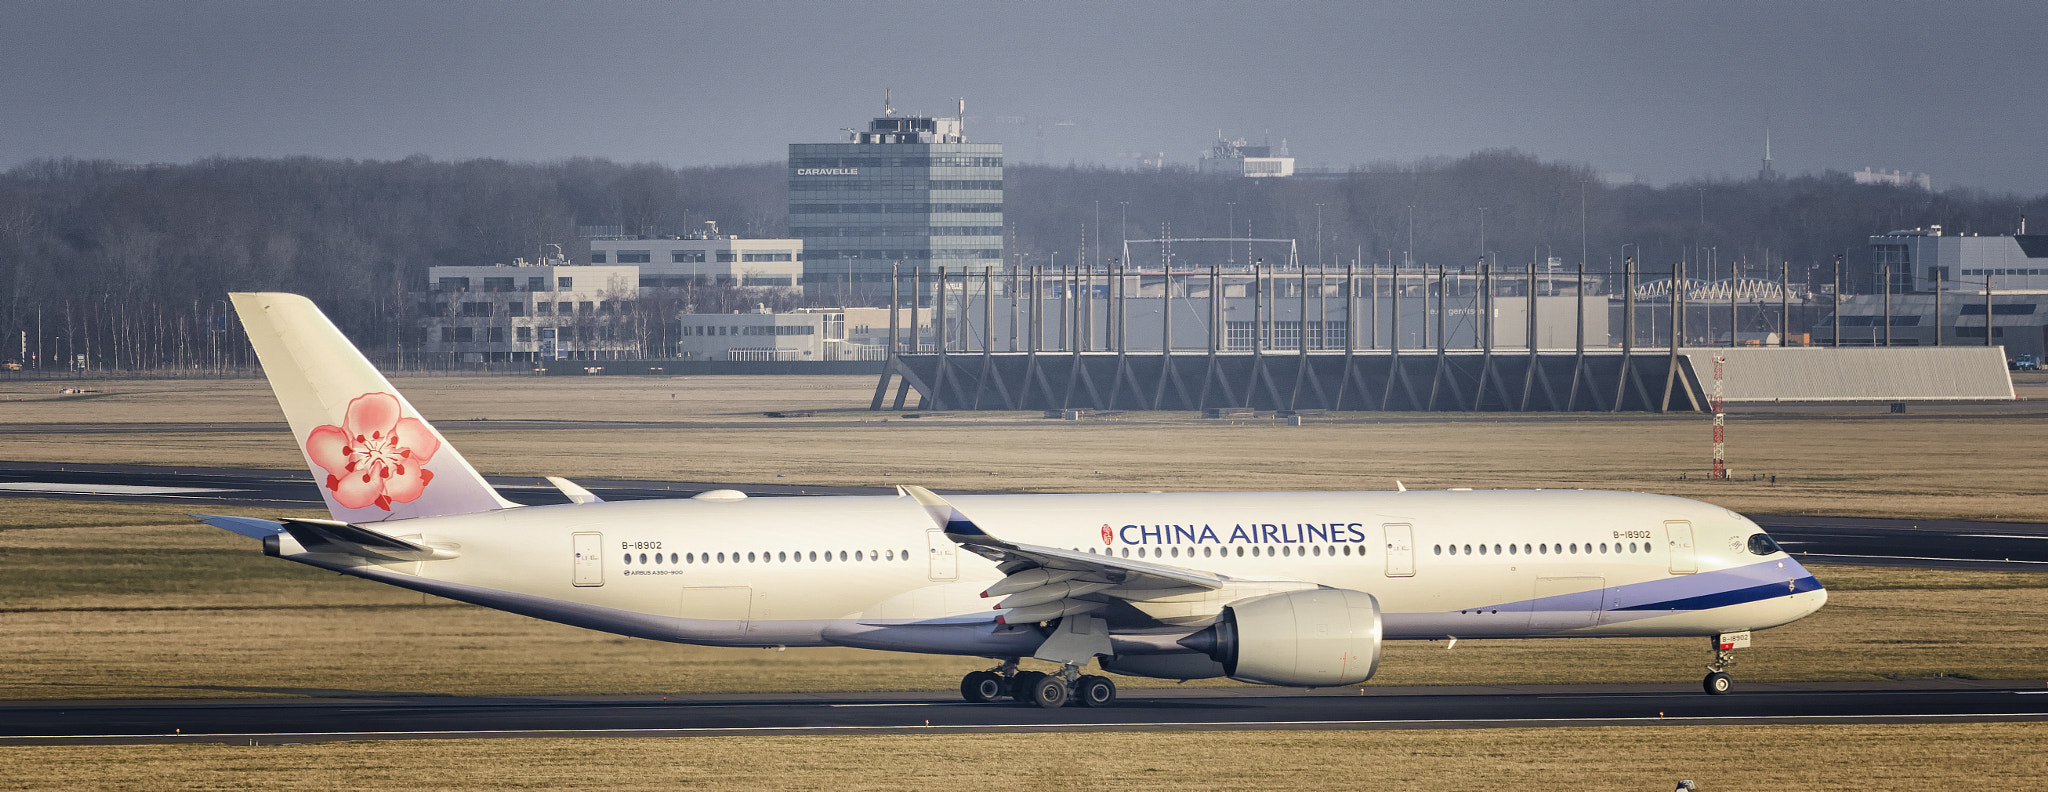 Sony a6000 sample photo. B china airlines airbus acn photography